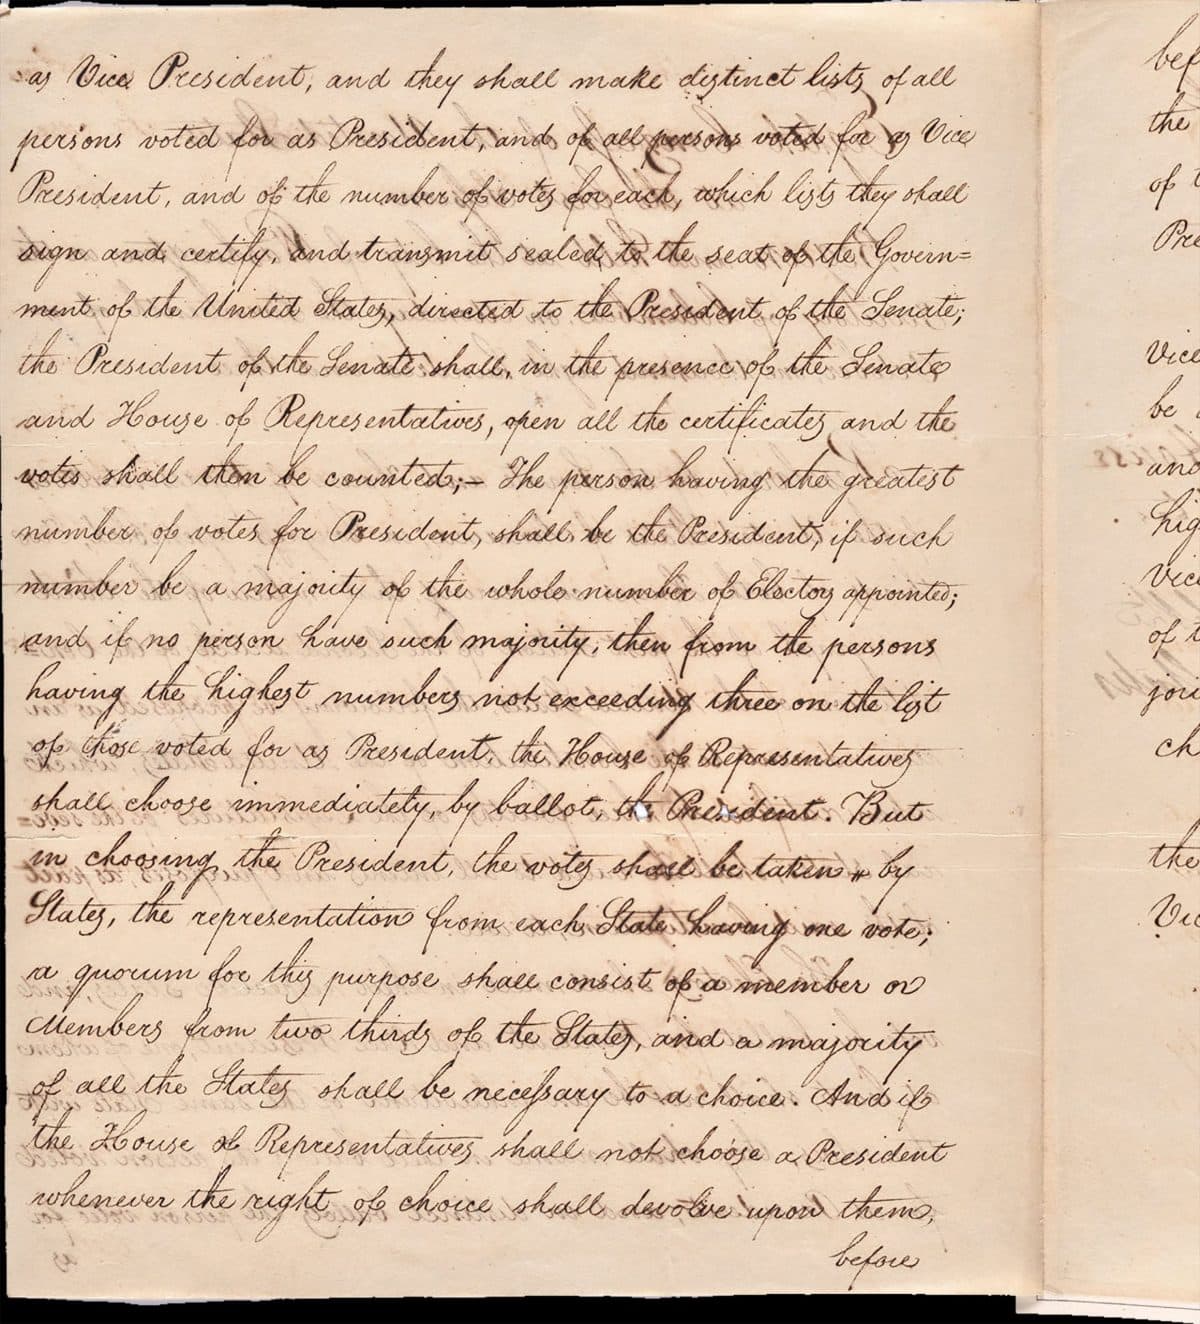 Certified Manuscript Copy of the Twelfth Amendment as Approved by Congress,  1803